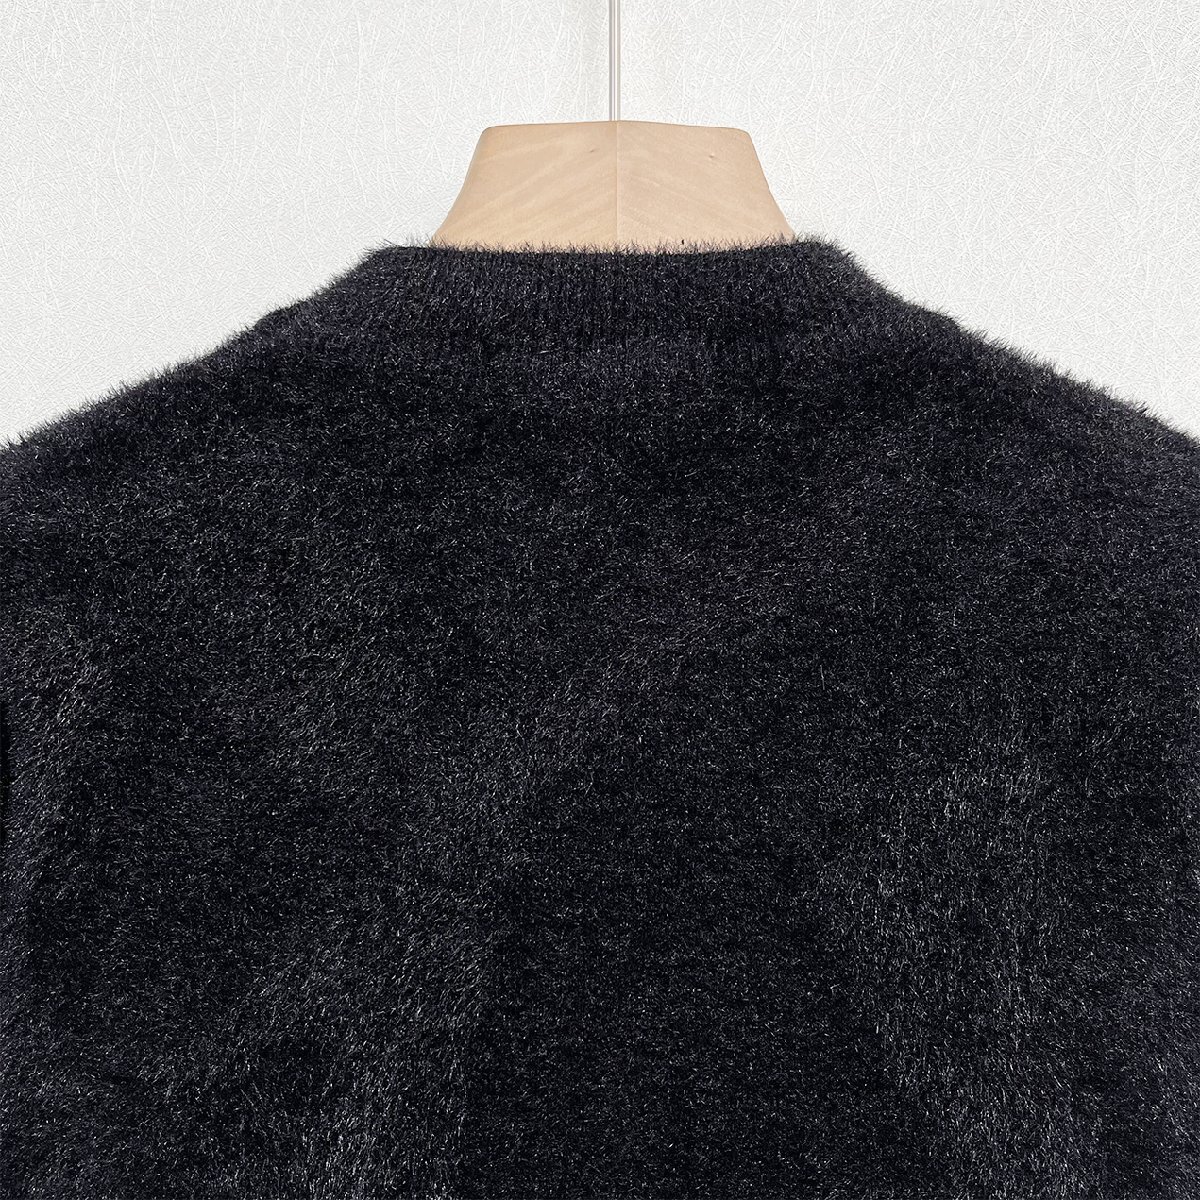  highest peak Europe made * regular price 5 ten thousand * BVLGARY a departure *RISELIN sweater cashmere / mink . ound-necked protection against cold nappy dressing up relax comfortable everyday L/48